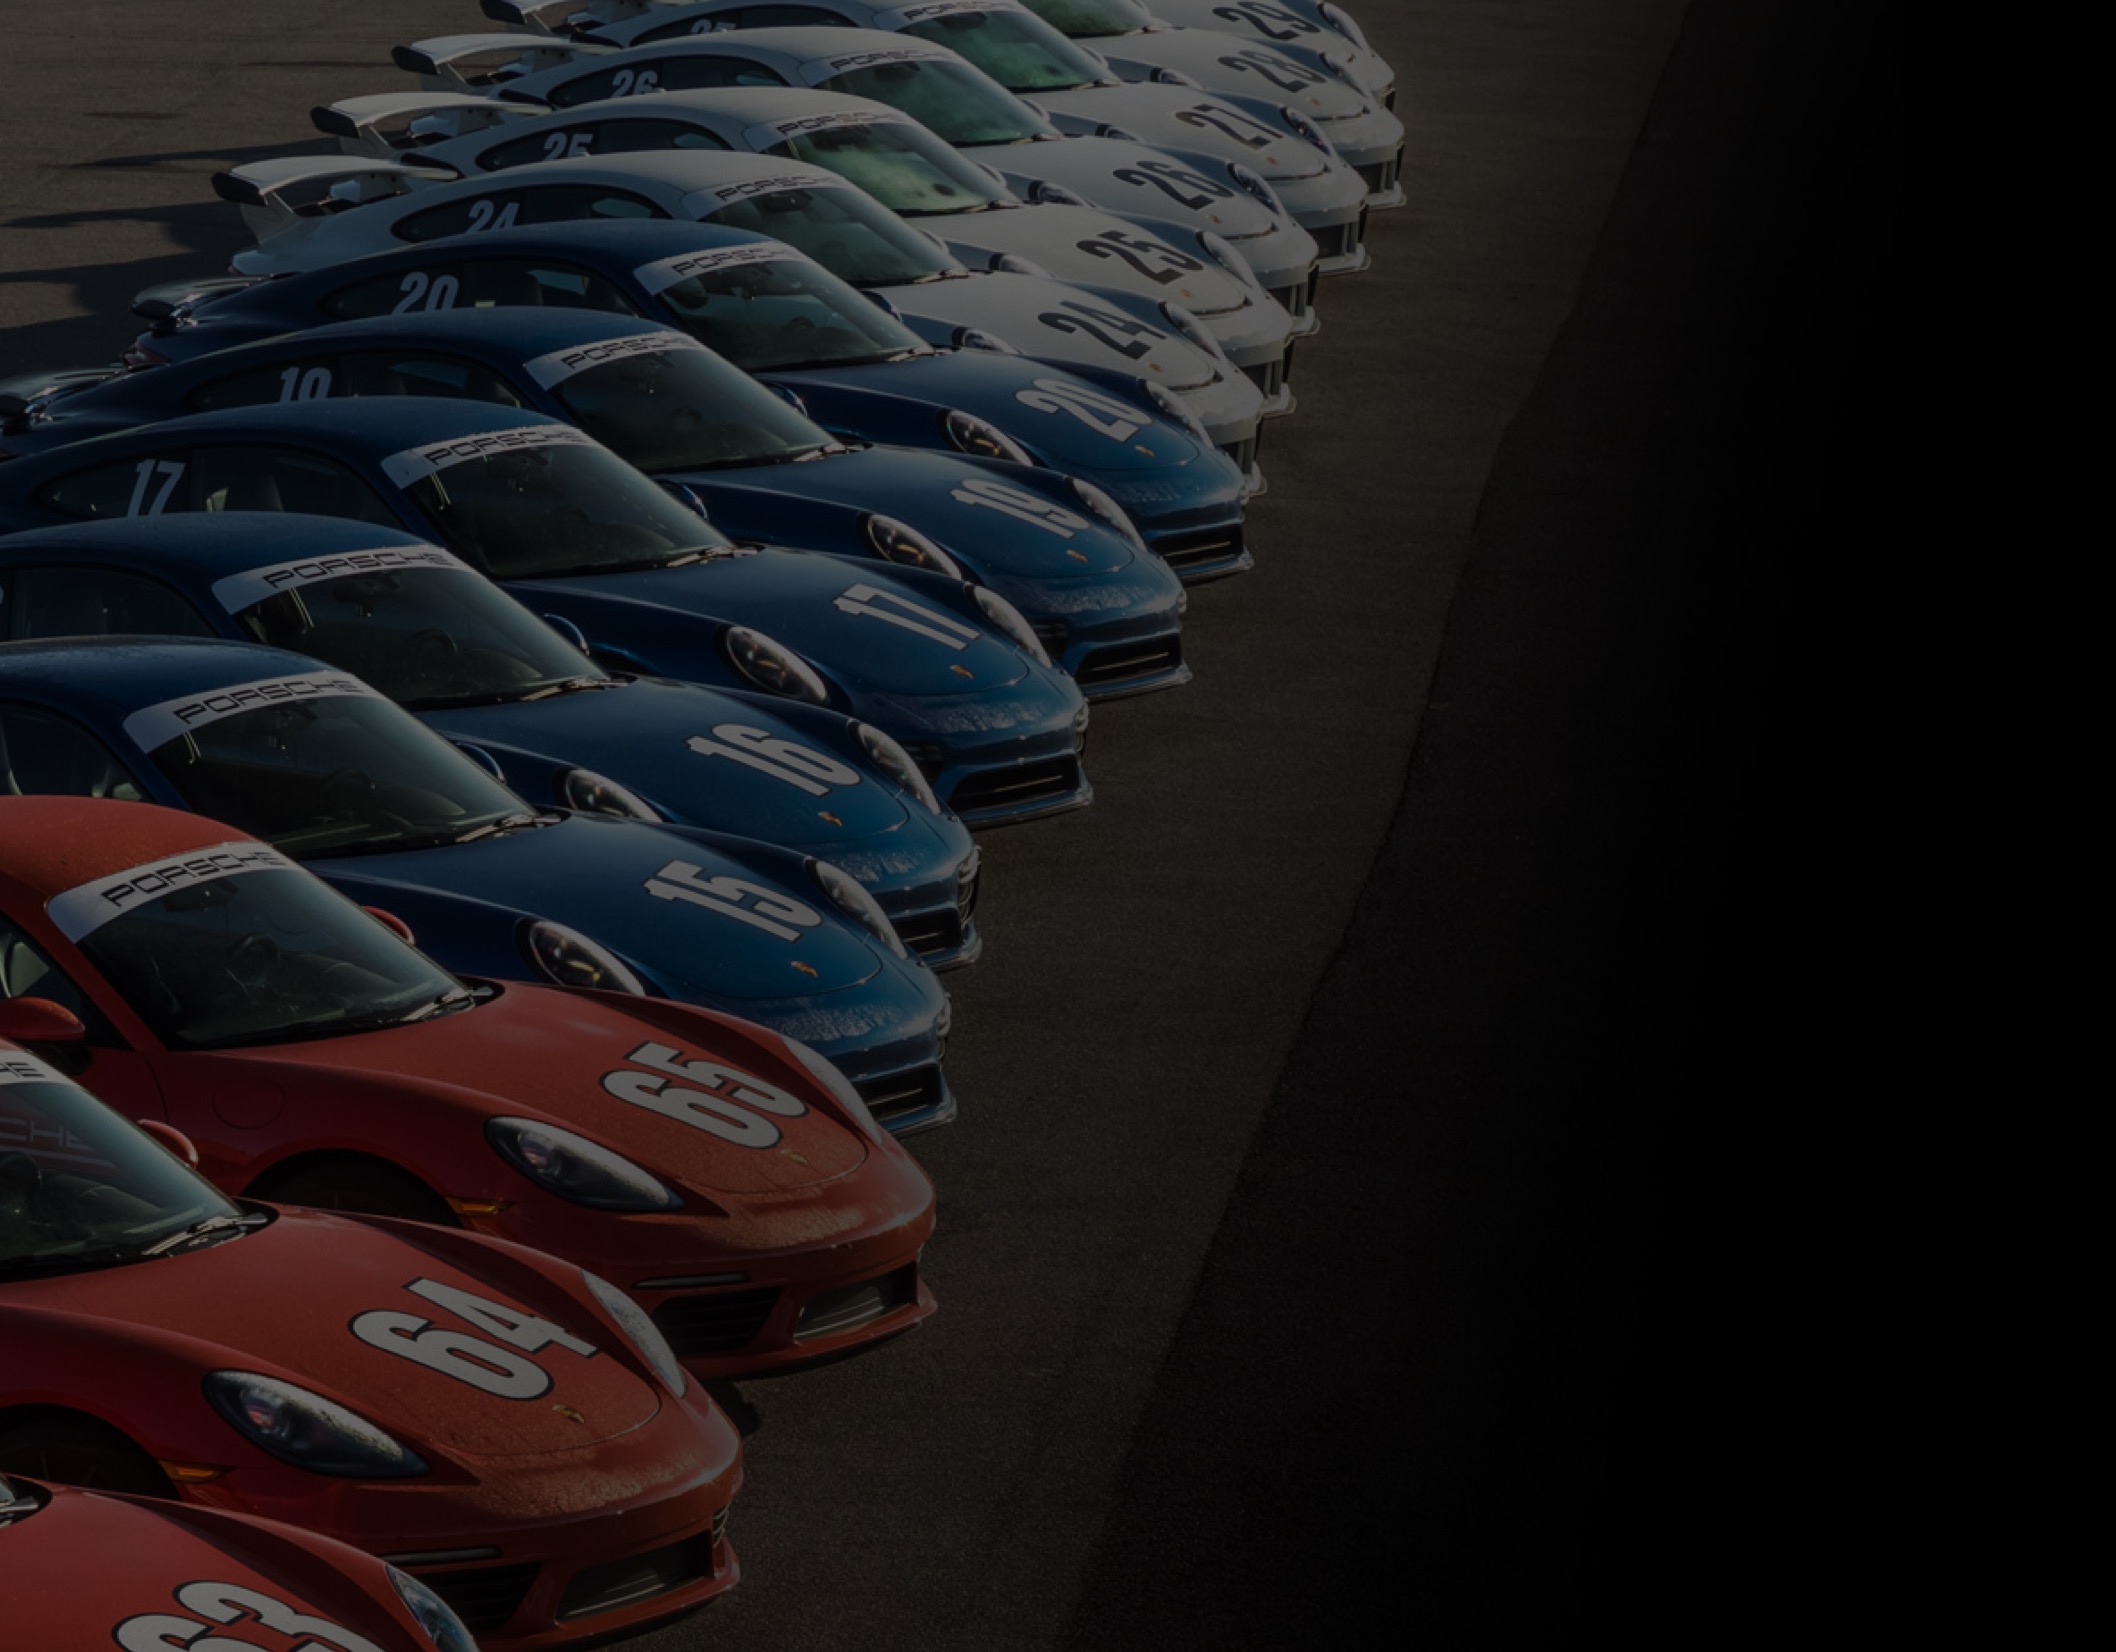 Itinerary background image - red, white and blue porsches lined up